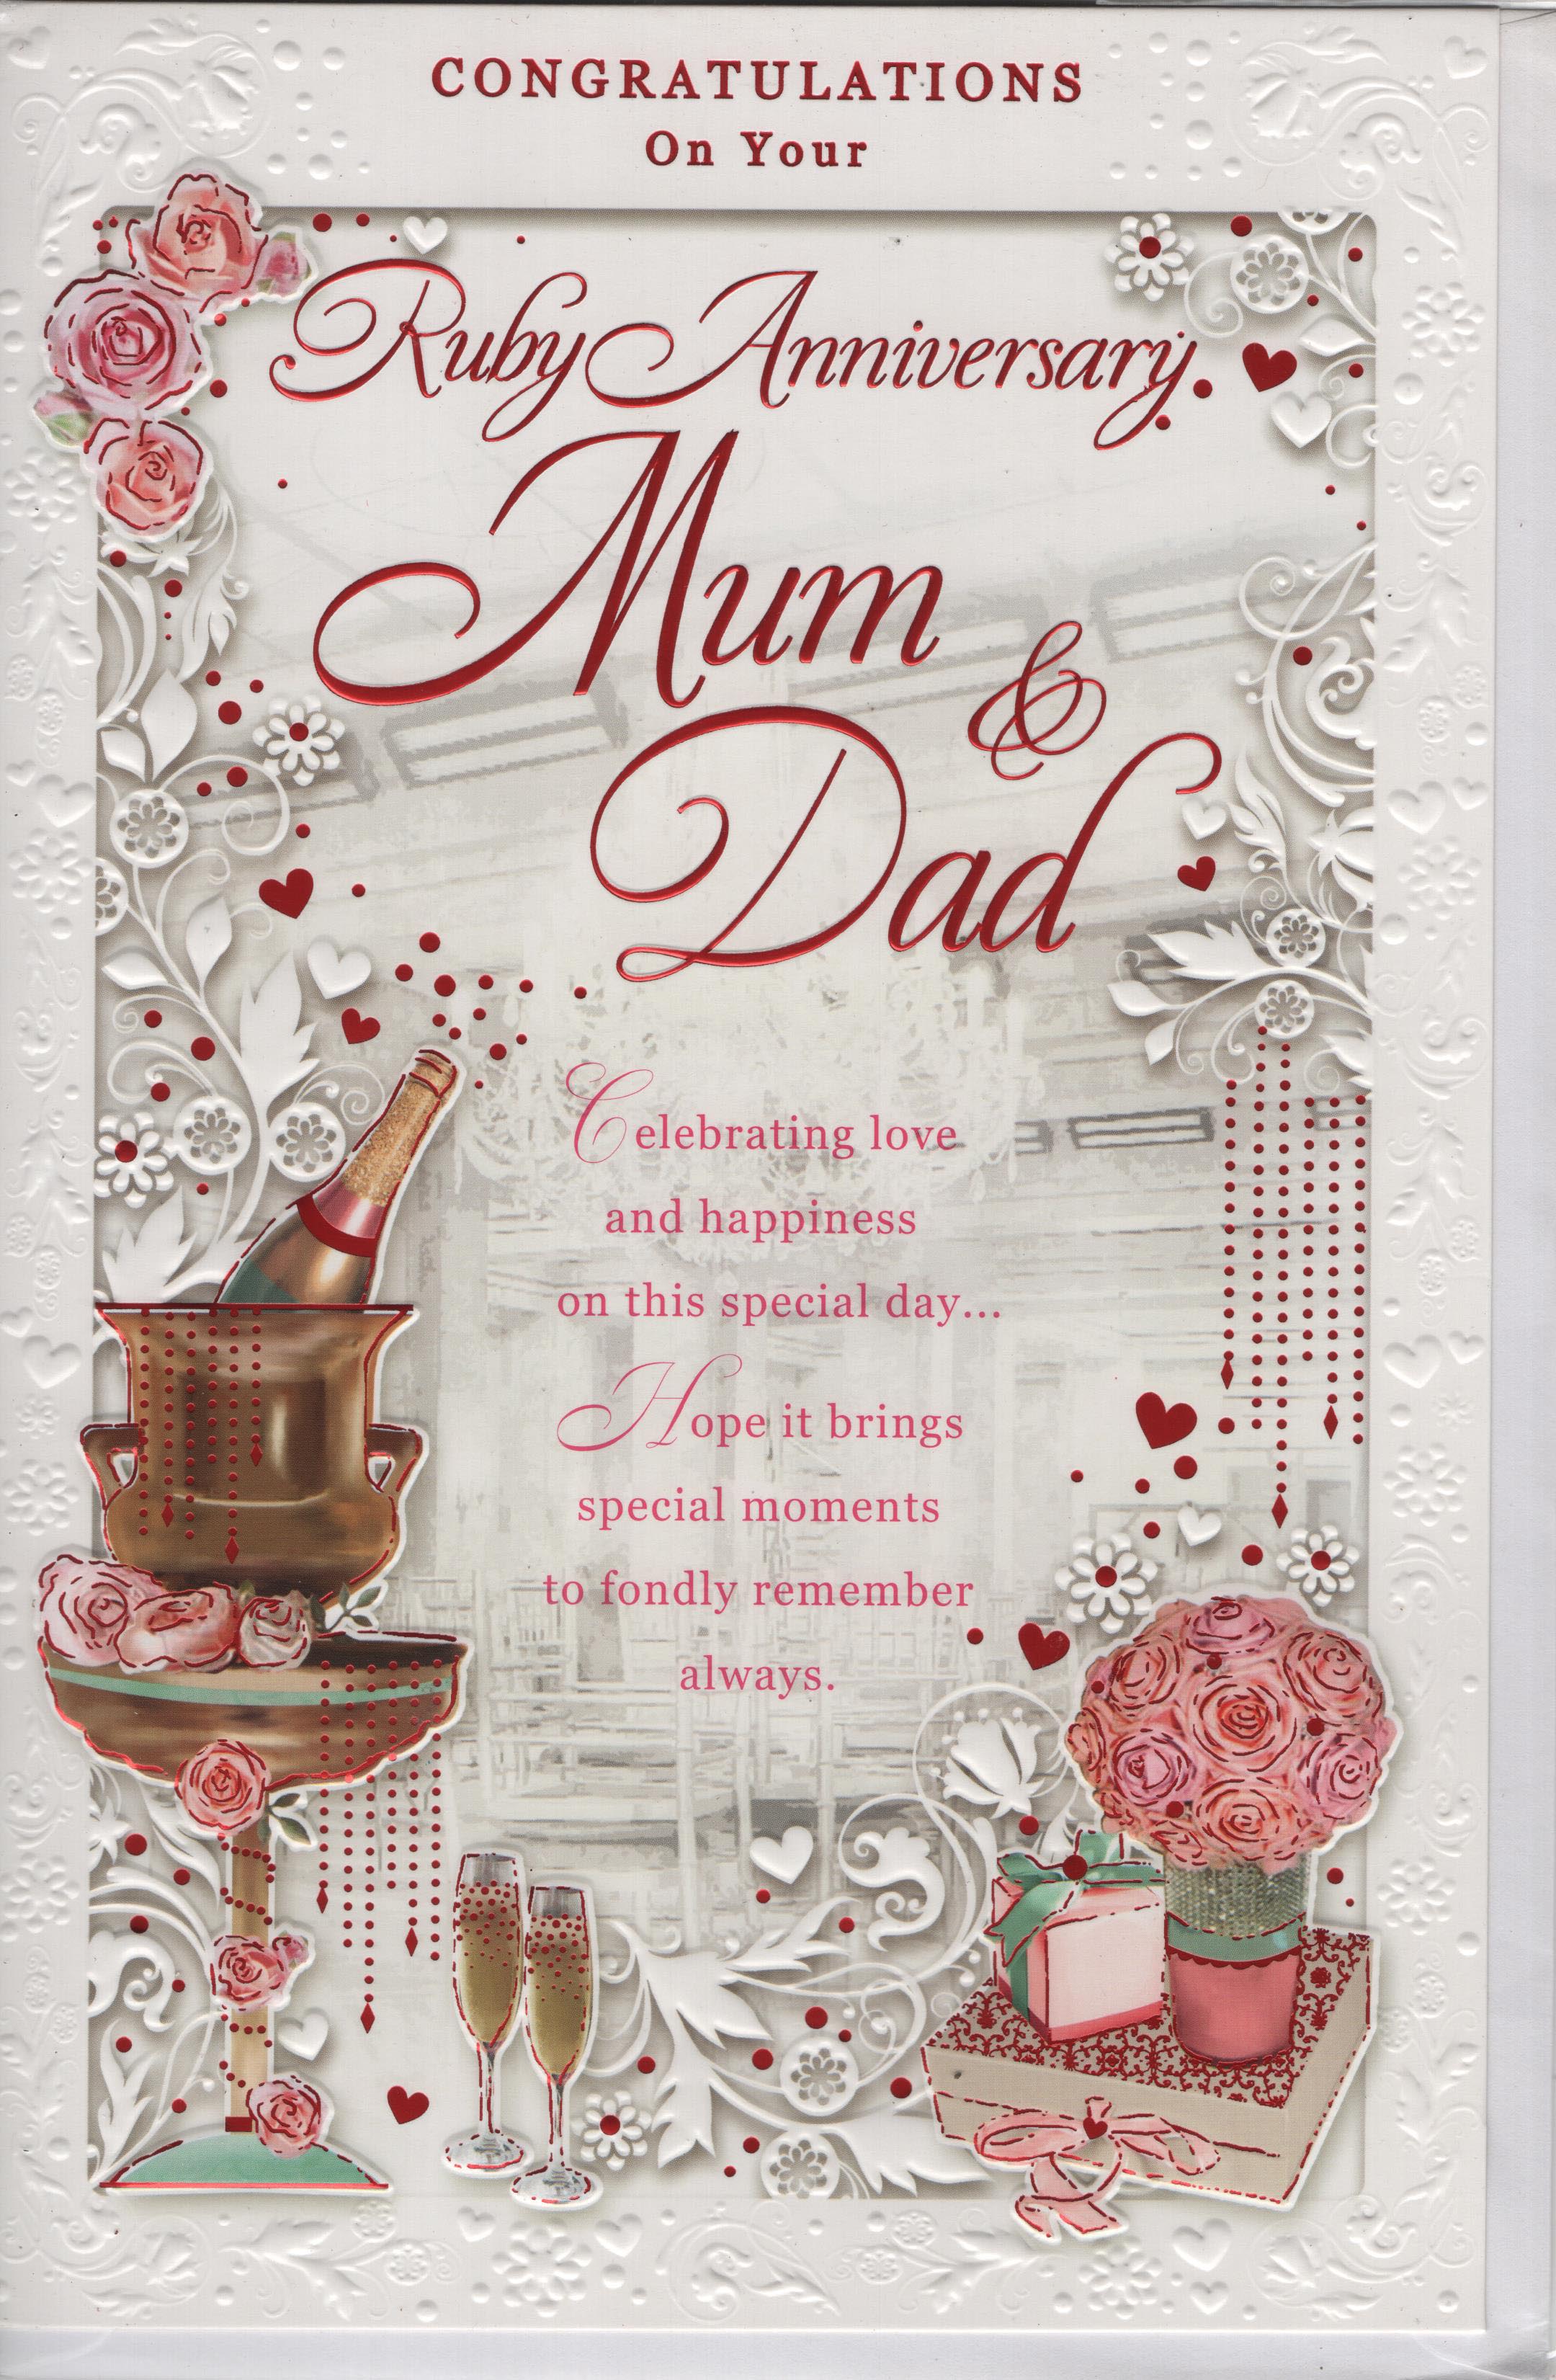 Xpress Yourself Greeting Card : Congratulations on Your Ruby Anniversary Mum and Dad 